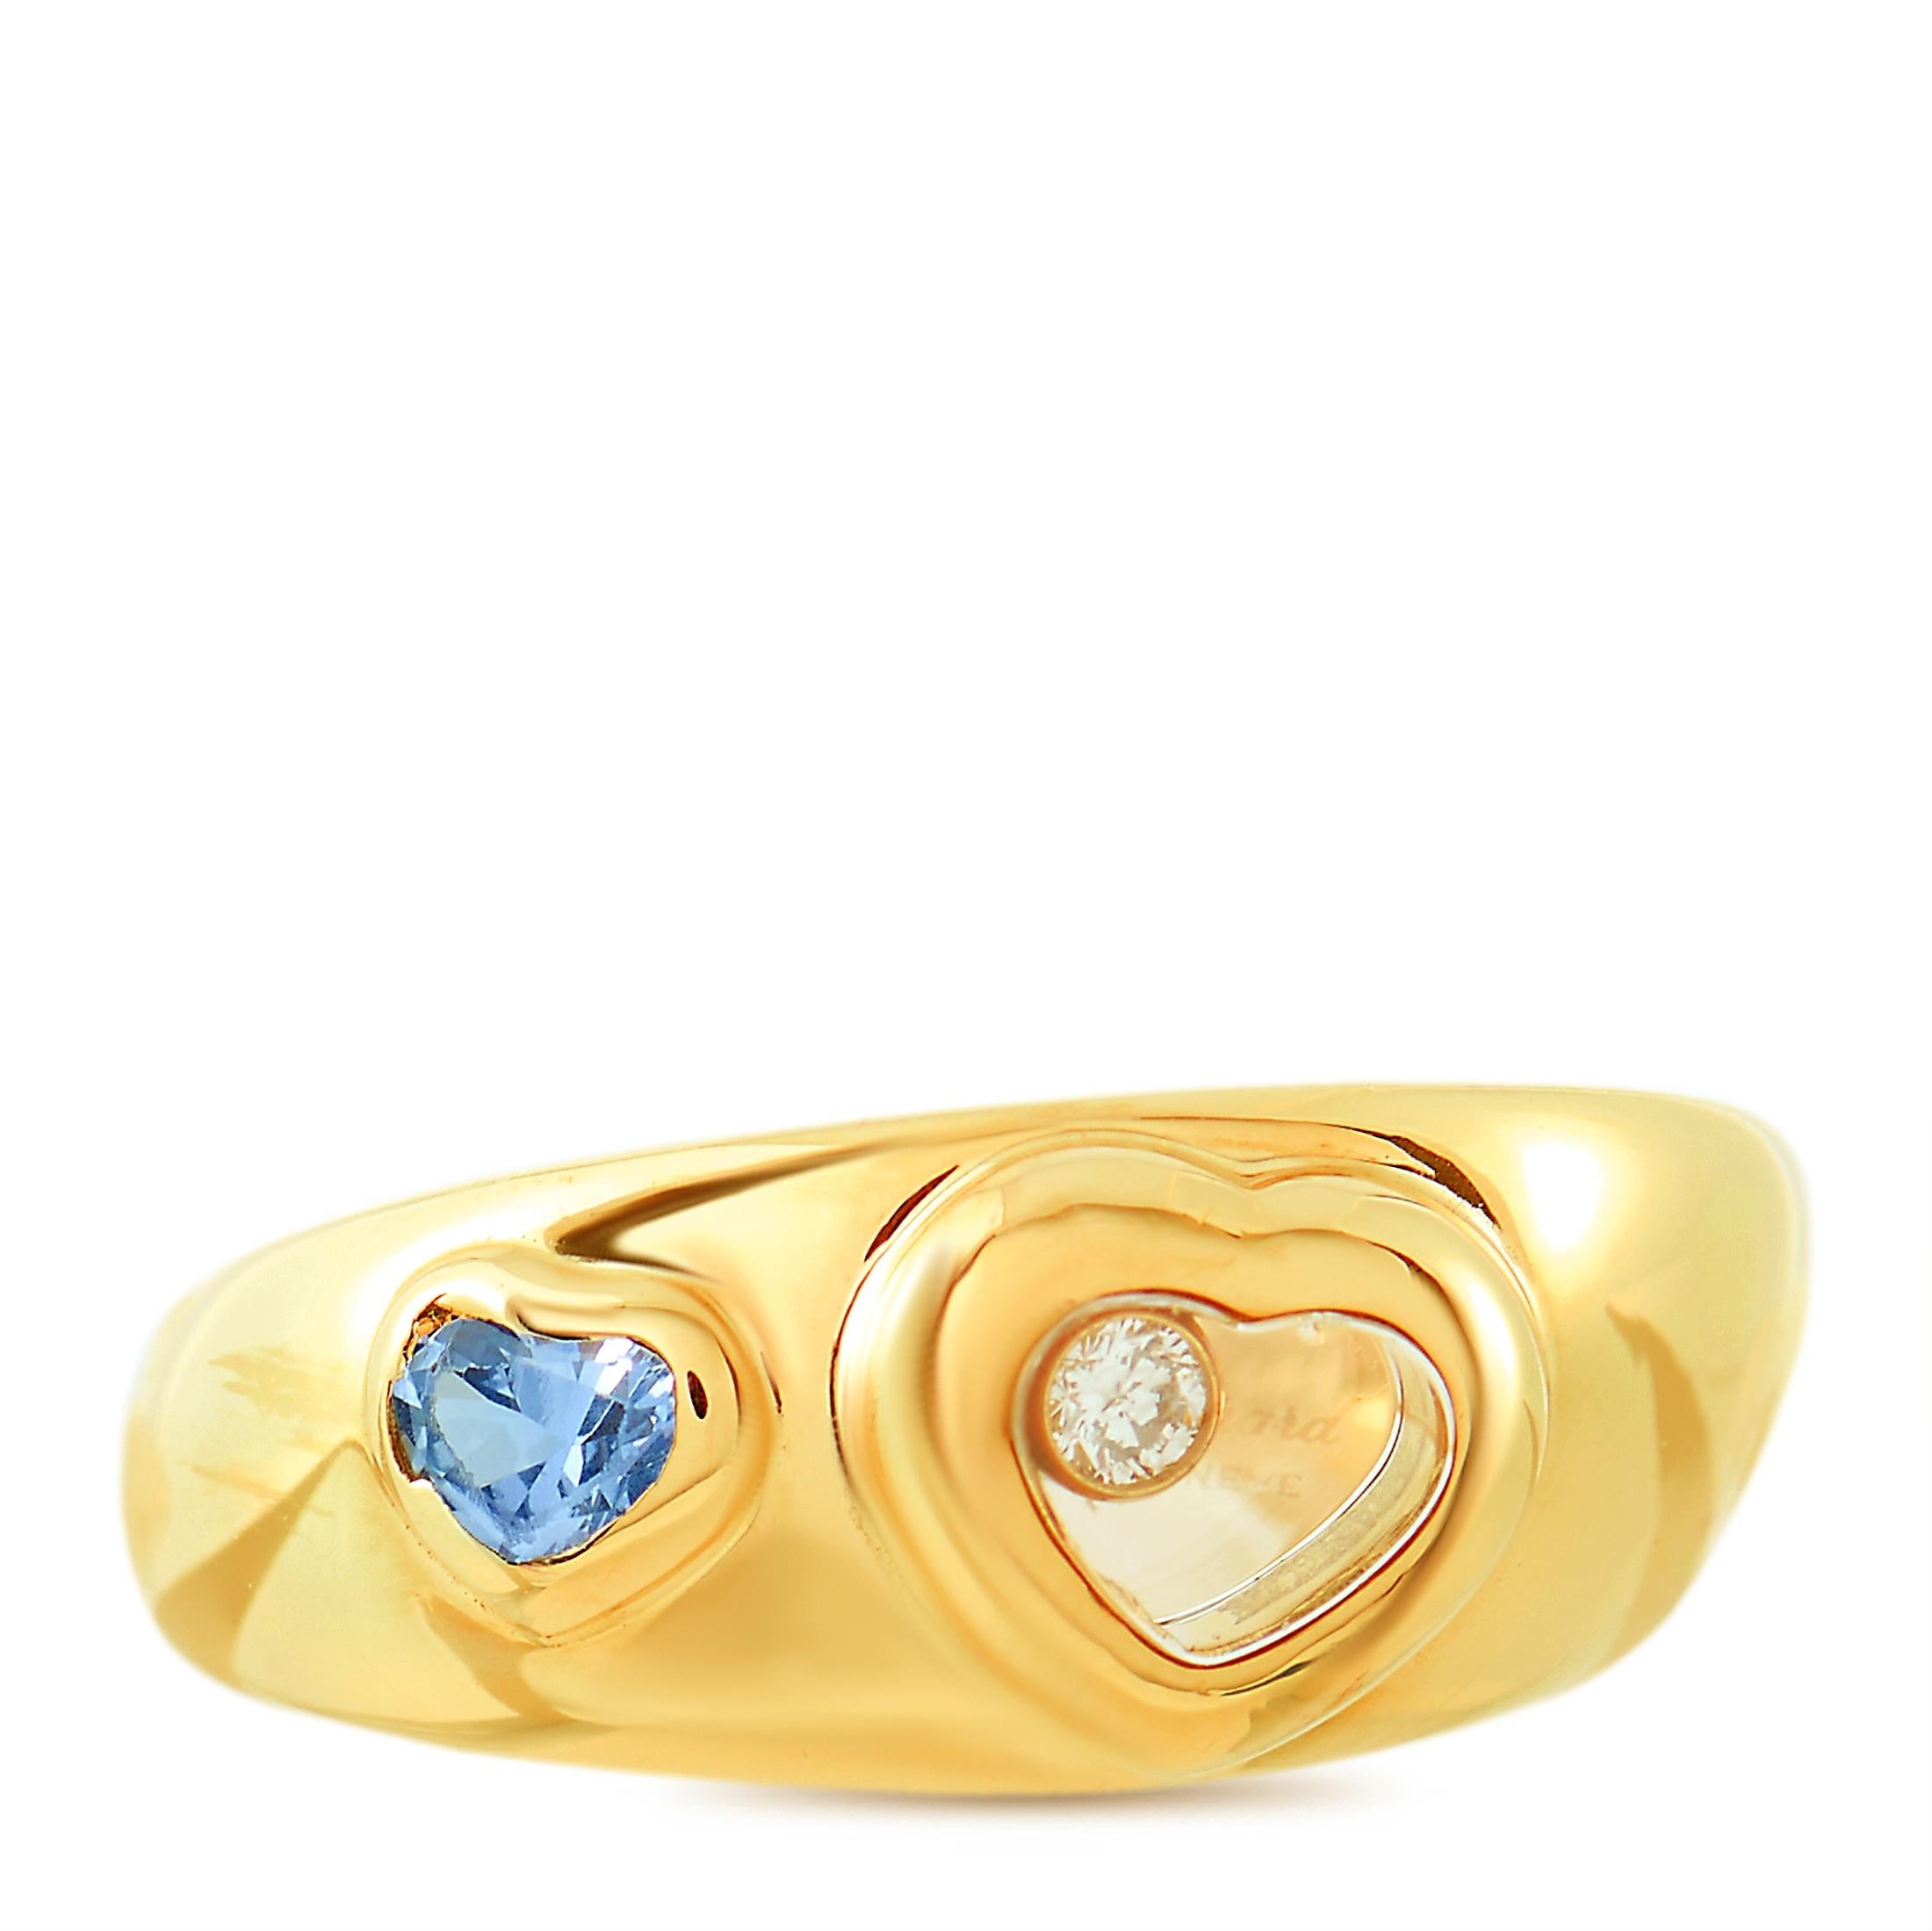 The Chopard “Happy Diamonds” ring is made of 18K yellow gold and embellished with a floating diamond and a heart-shaped aquamarine. The ring weighs 9 grams and boasts band thickness of 5 mm and top height of 4 mm, while top dimensions measure 9 by